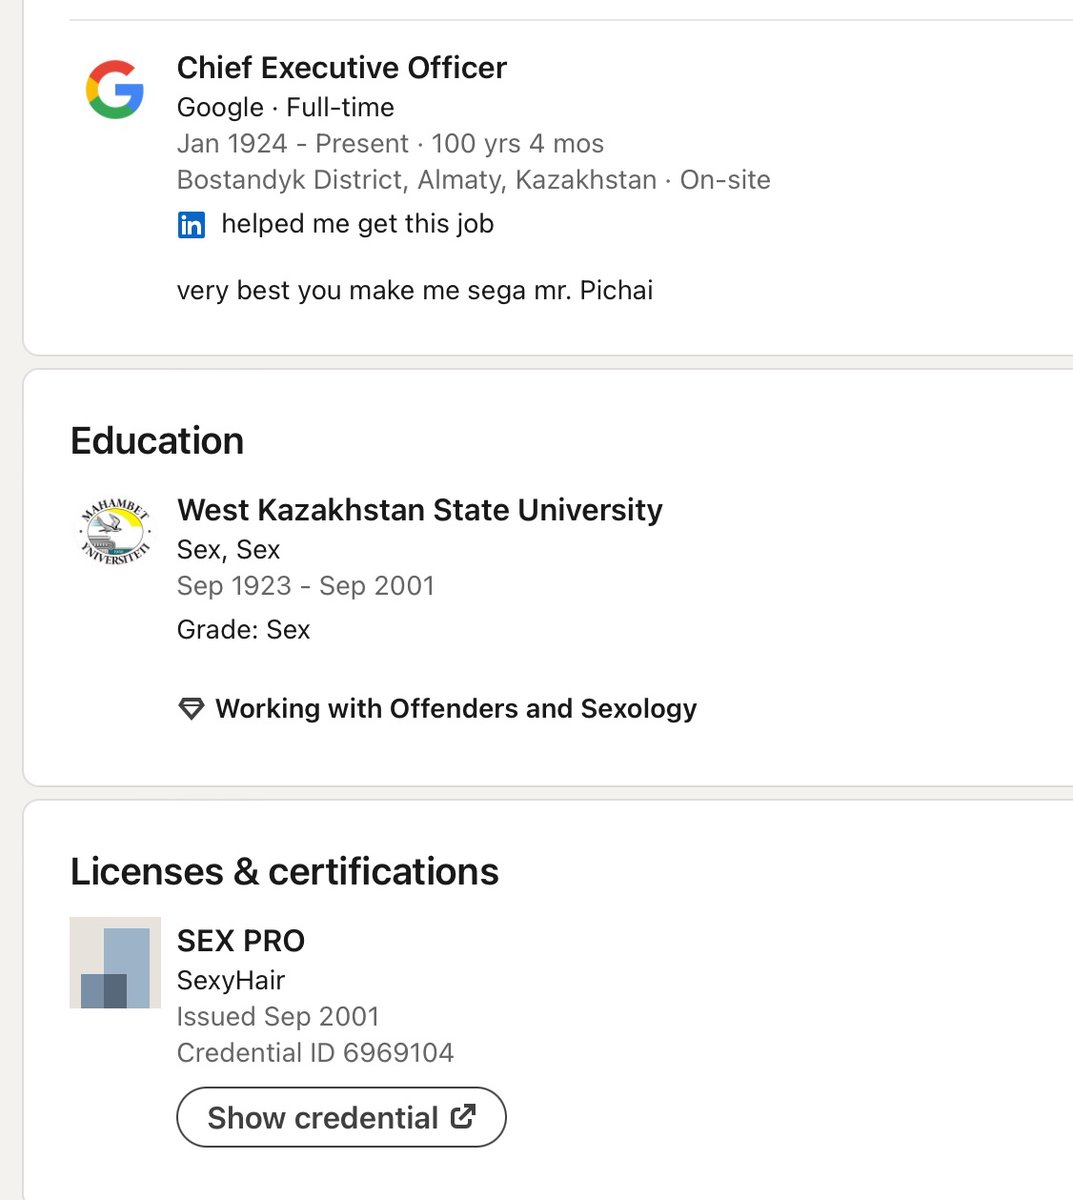 LinkedIn connection request of the day. Someone who studied Sex, Sex at West Kazakhstan State University and who has been CEO of Google for over a 100 years.